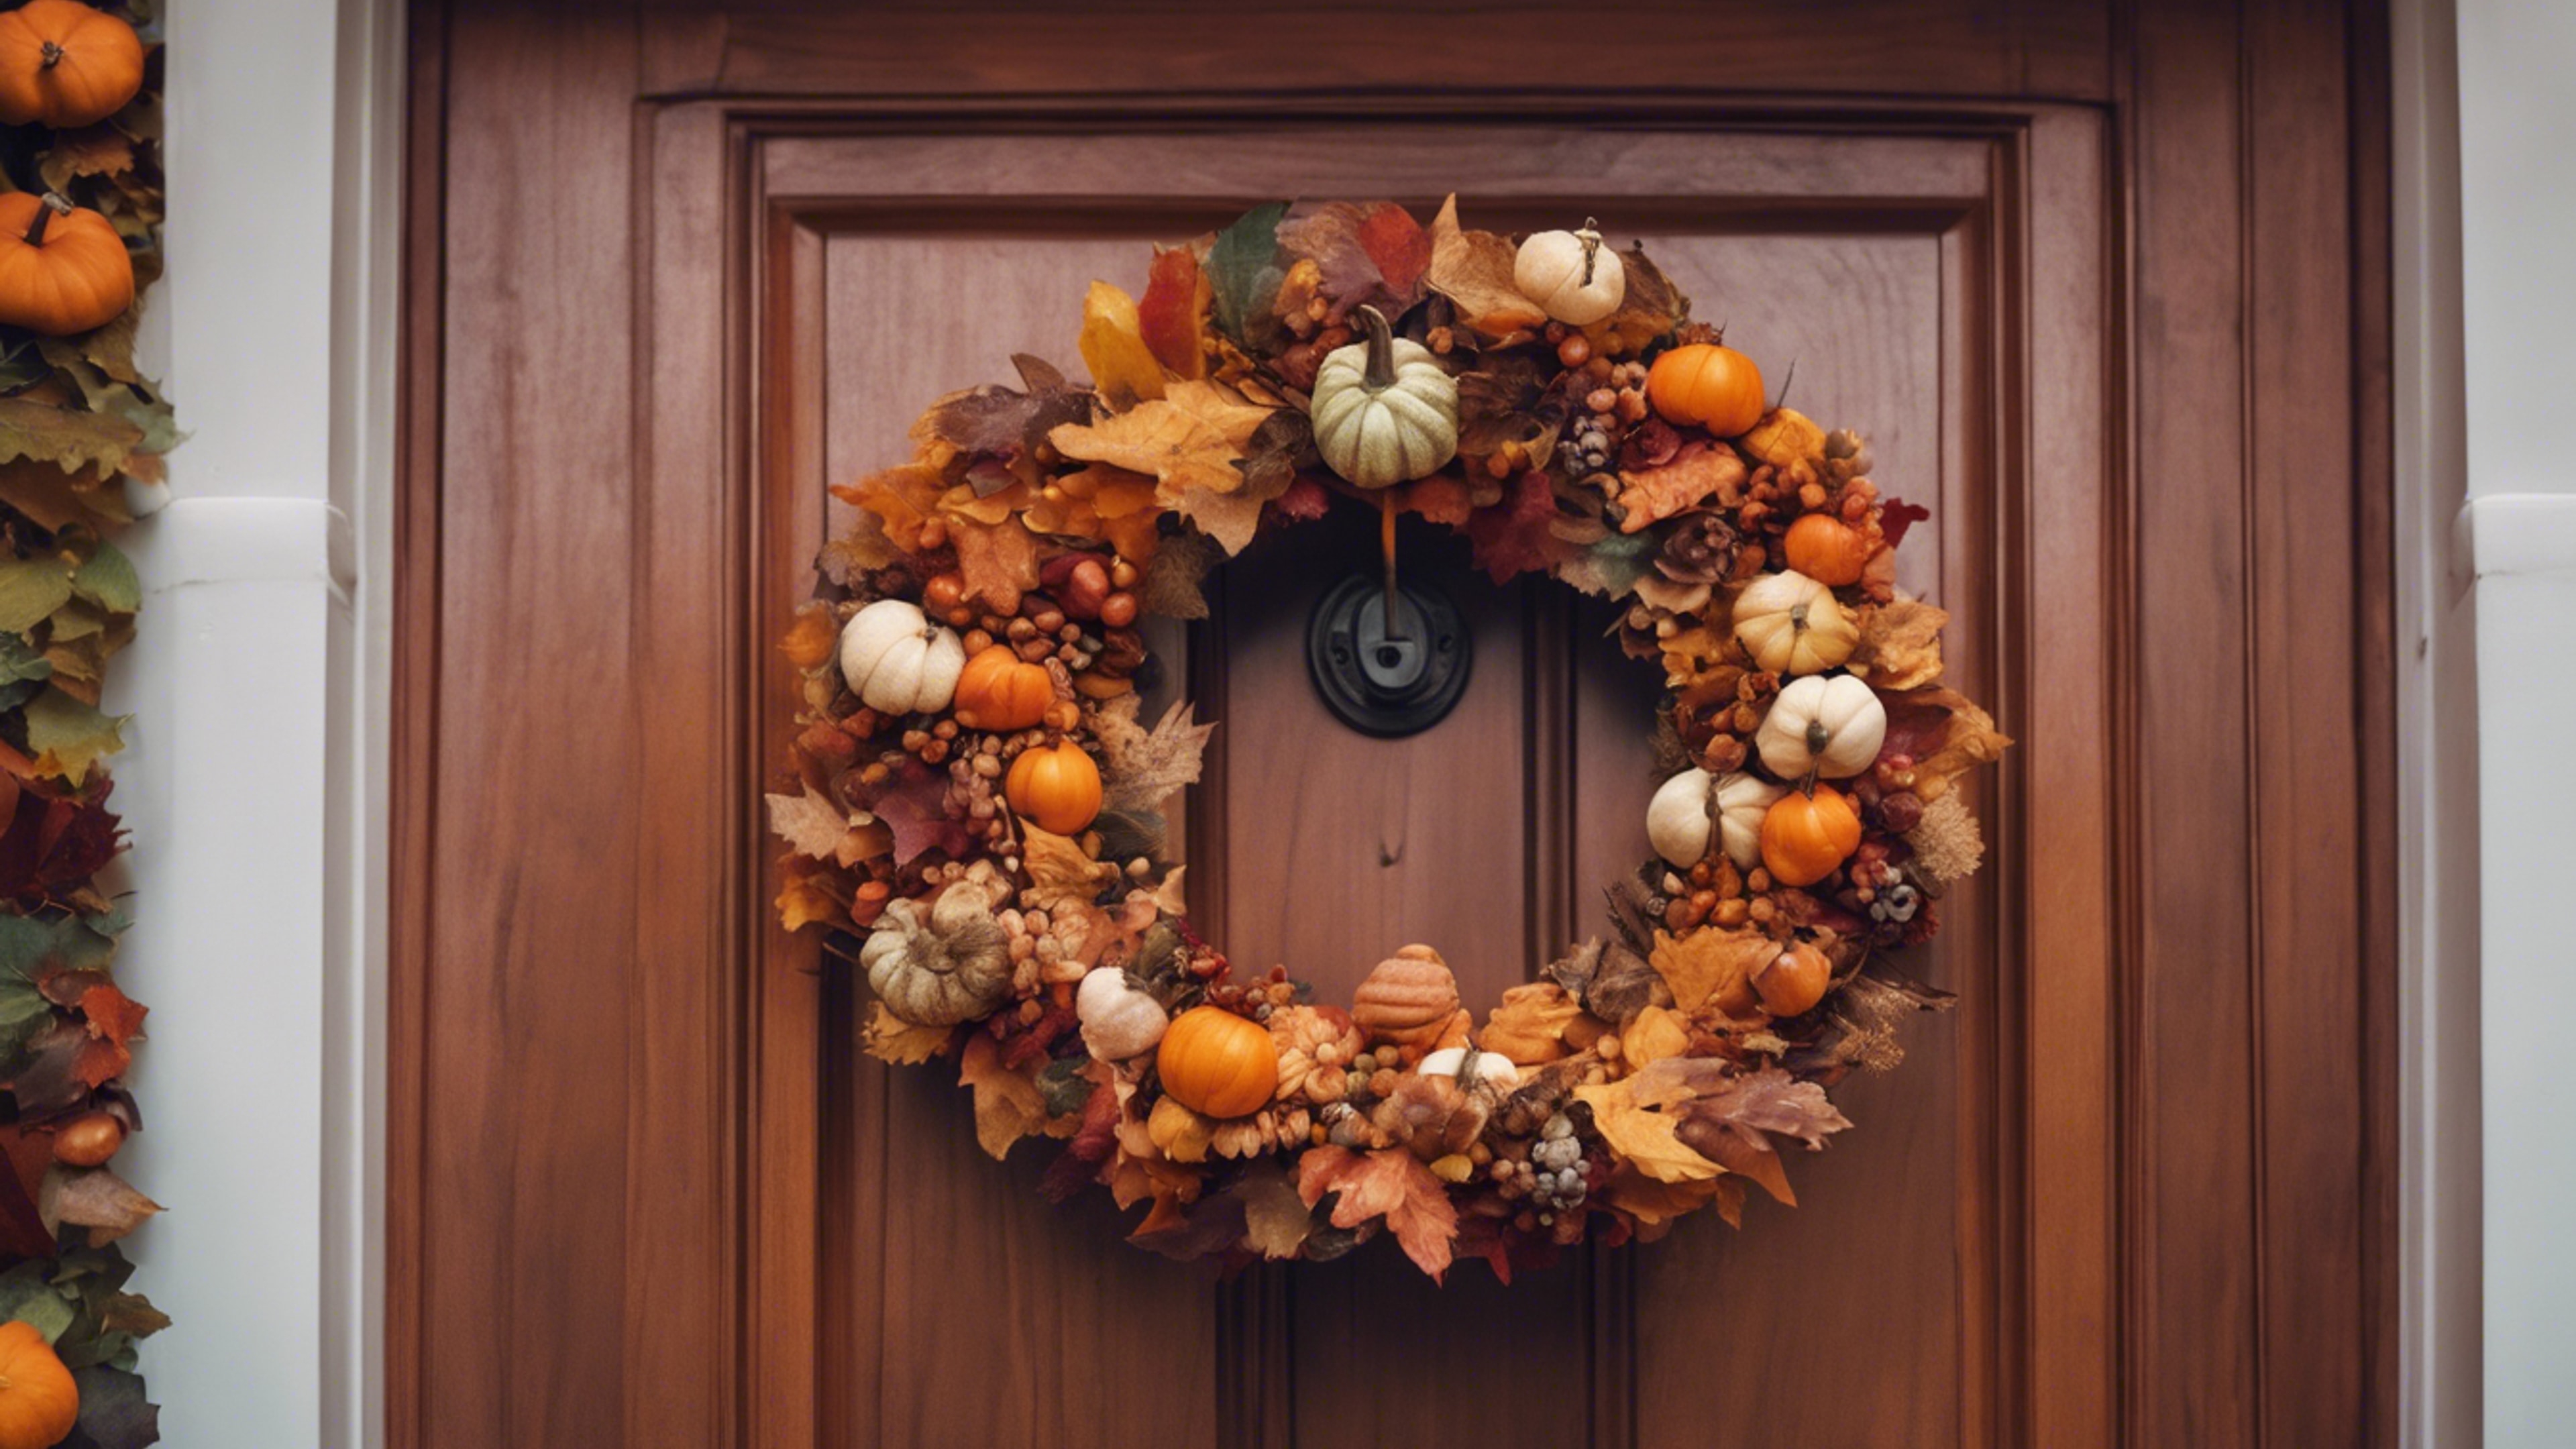 A festive autumn wreath made of colorful fall leaves and miniature pumpkins hanging elegantly on a mahogany door, signaling the start of the Thanksgiving holiday.壁紙[f1a39b05ecd5476686a3]